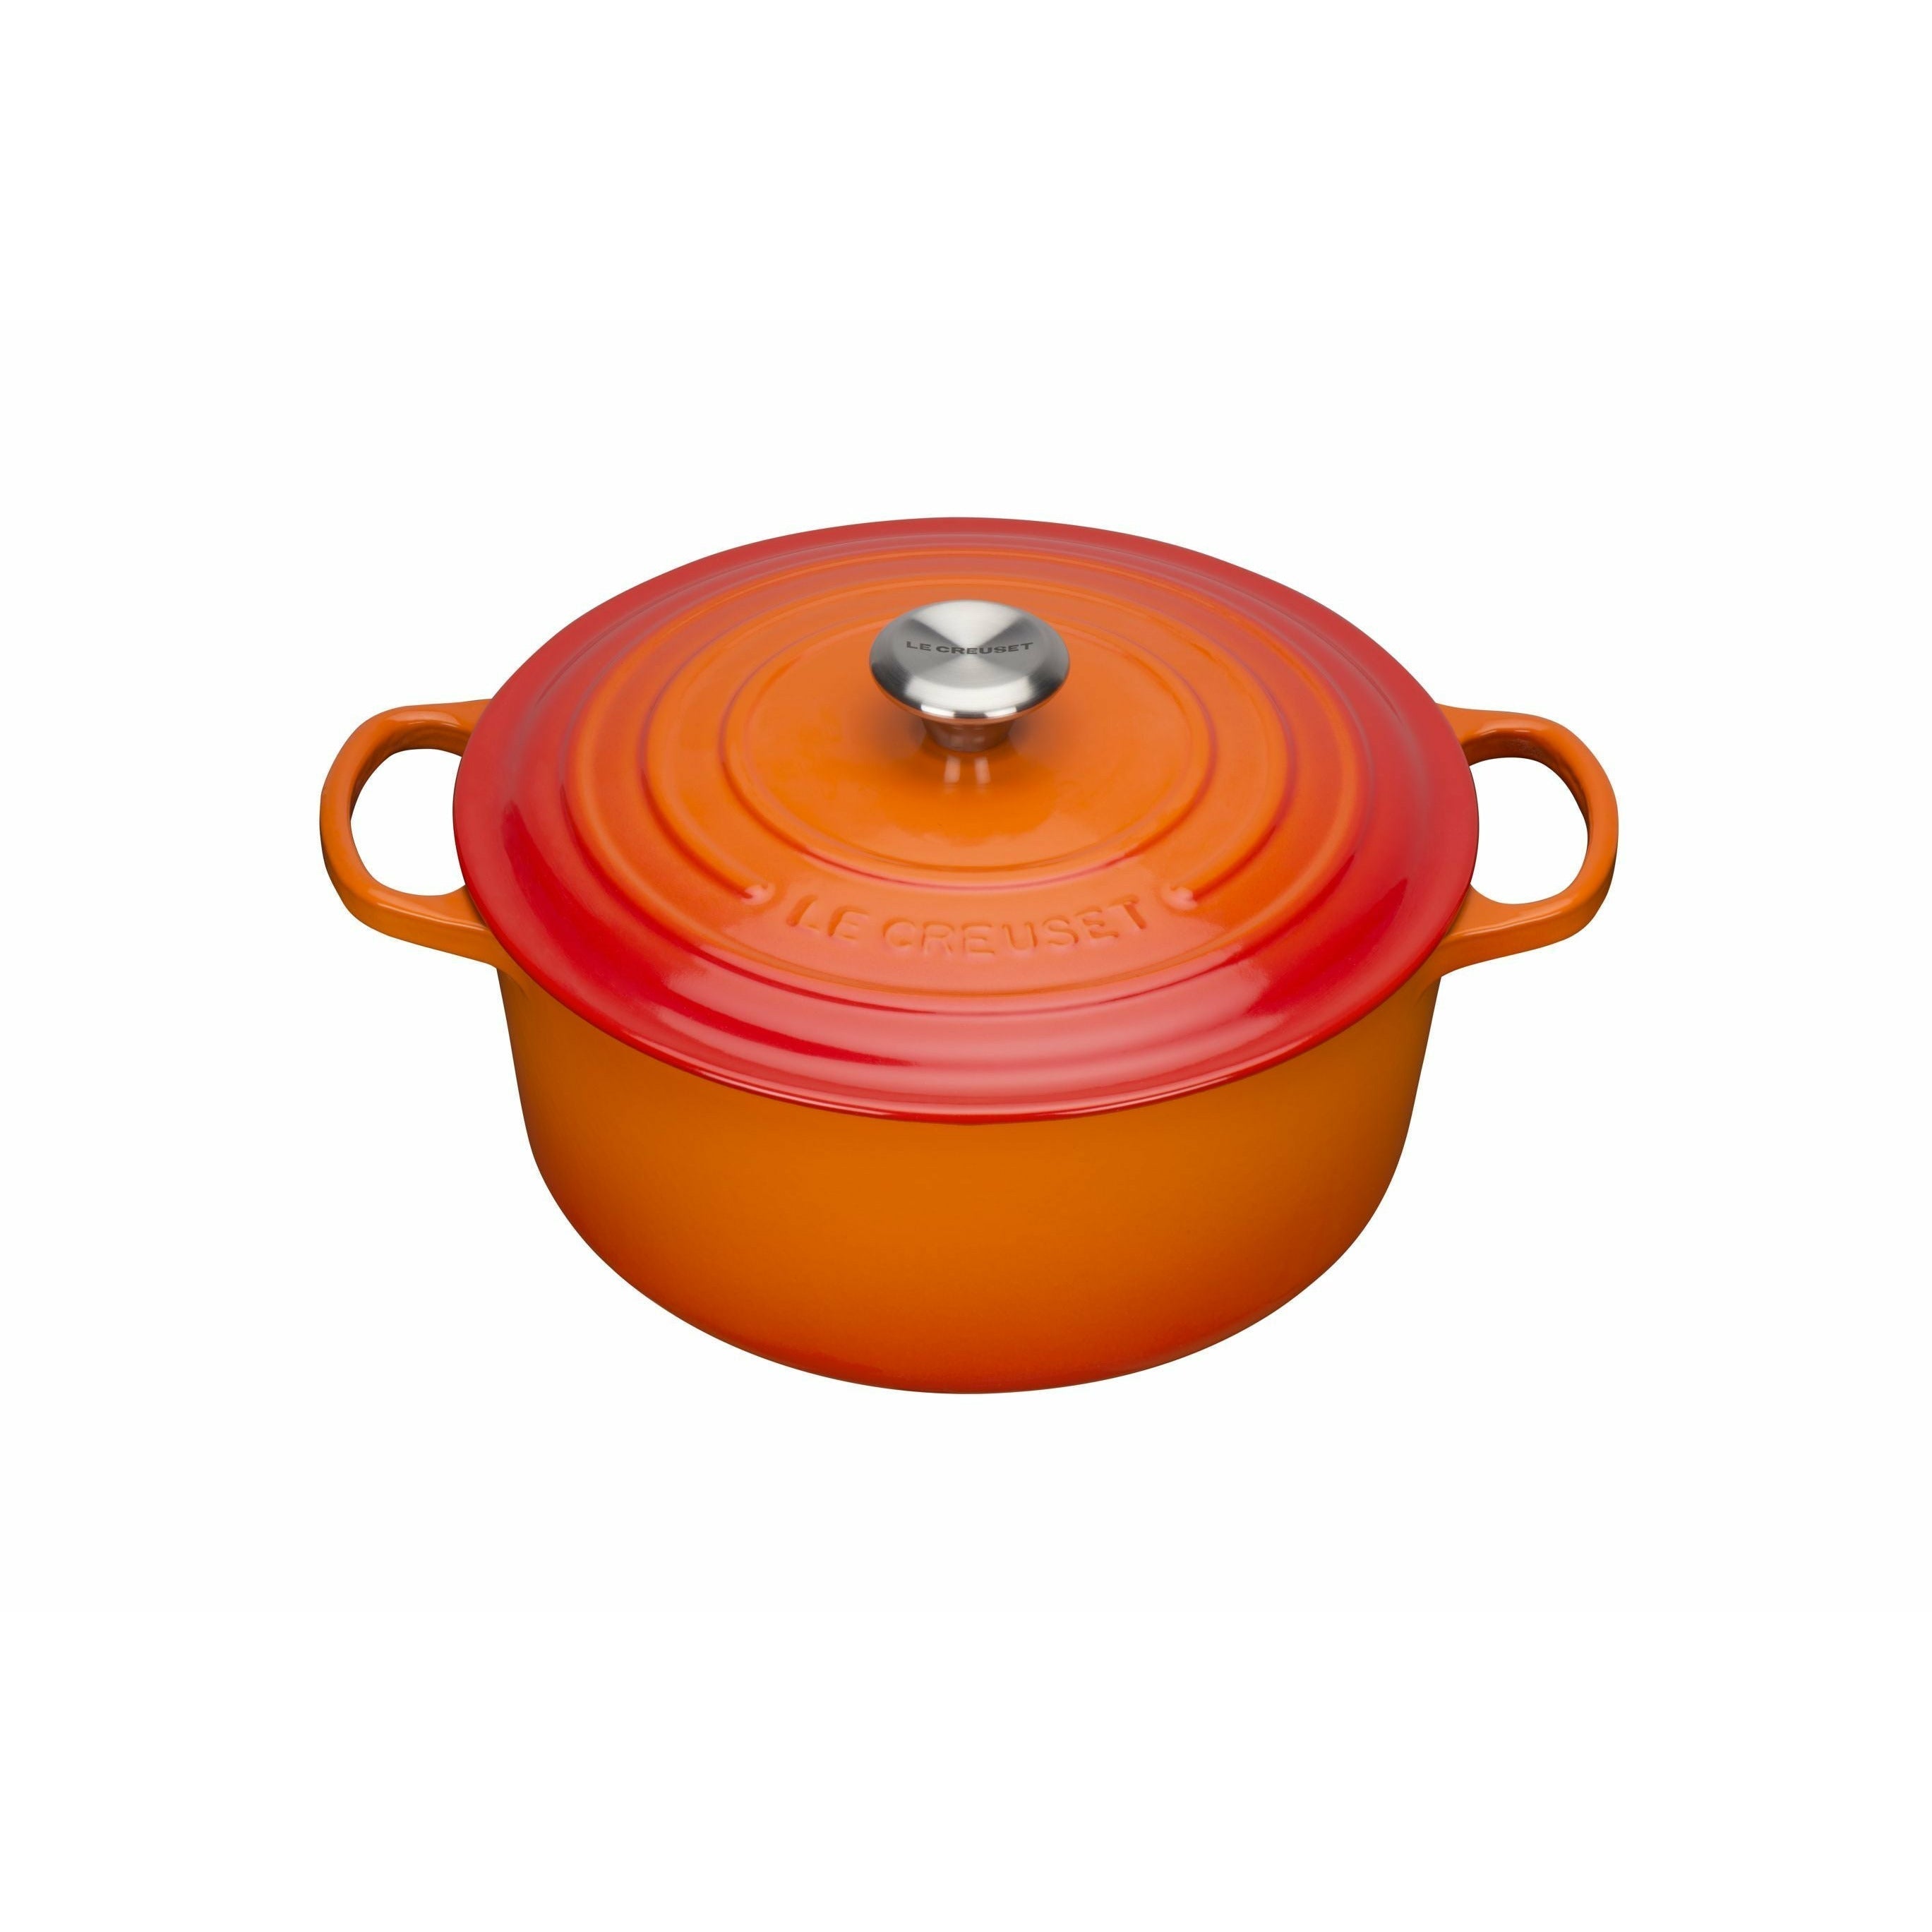 Le Creuset Signature Round Roaster 28 Cm, Oven Red